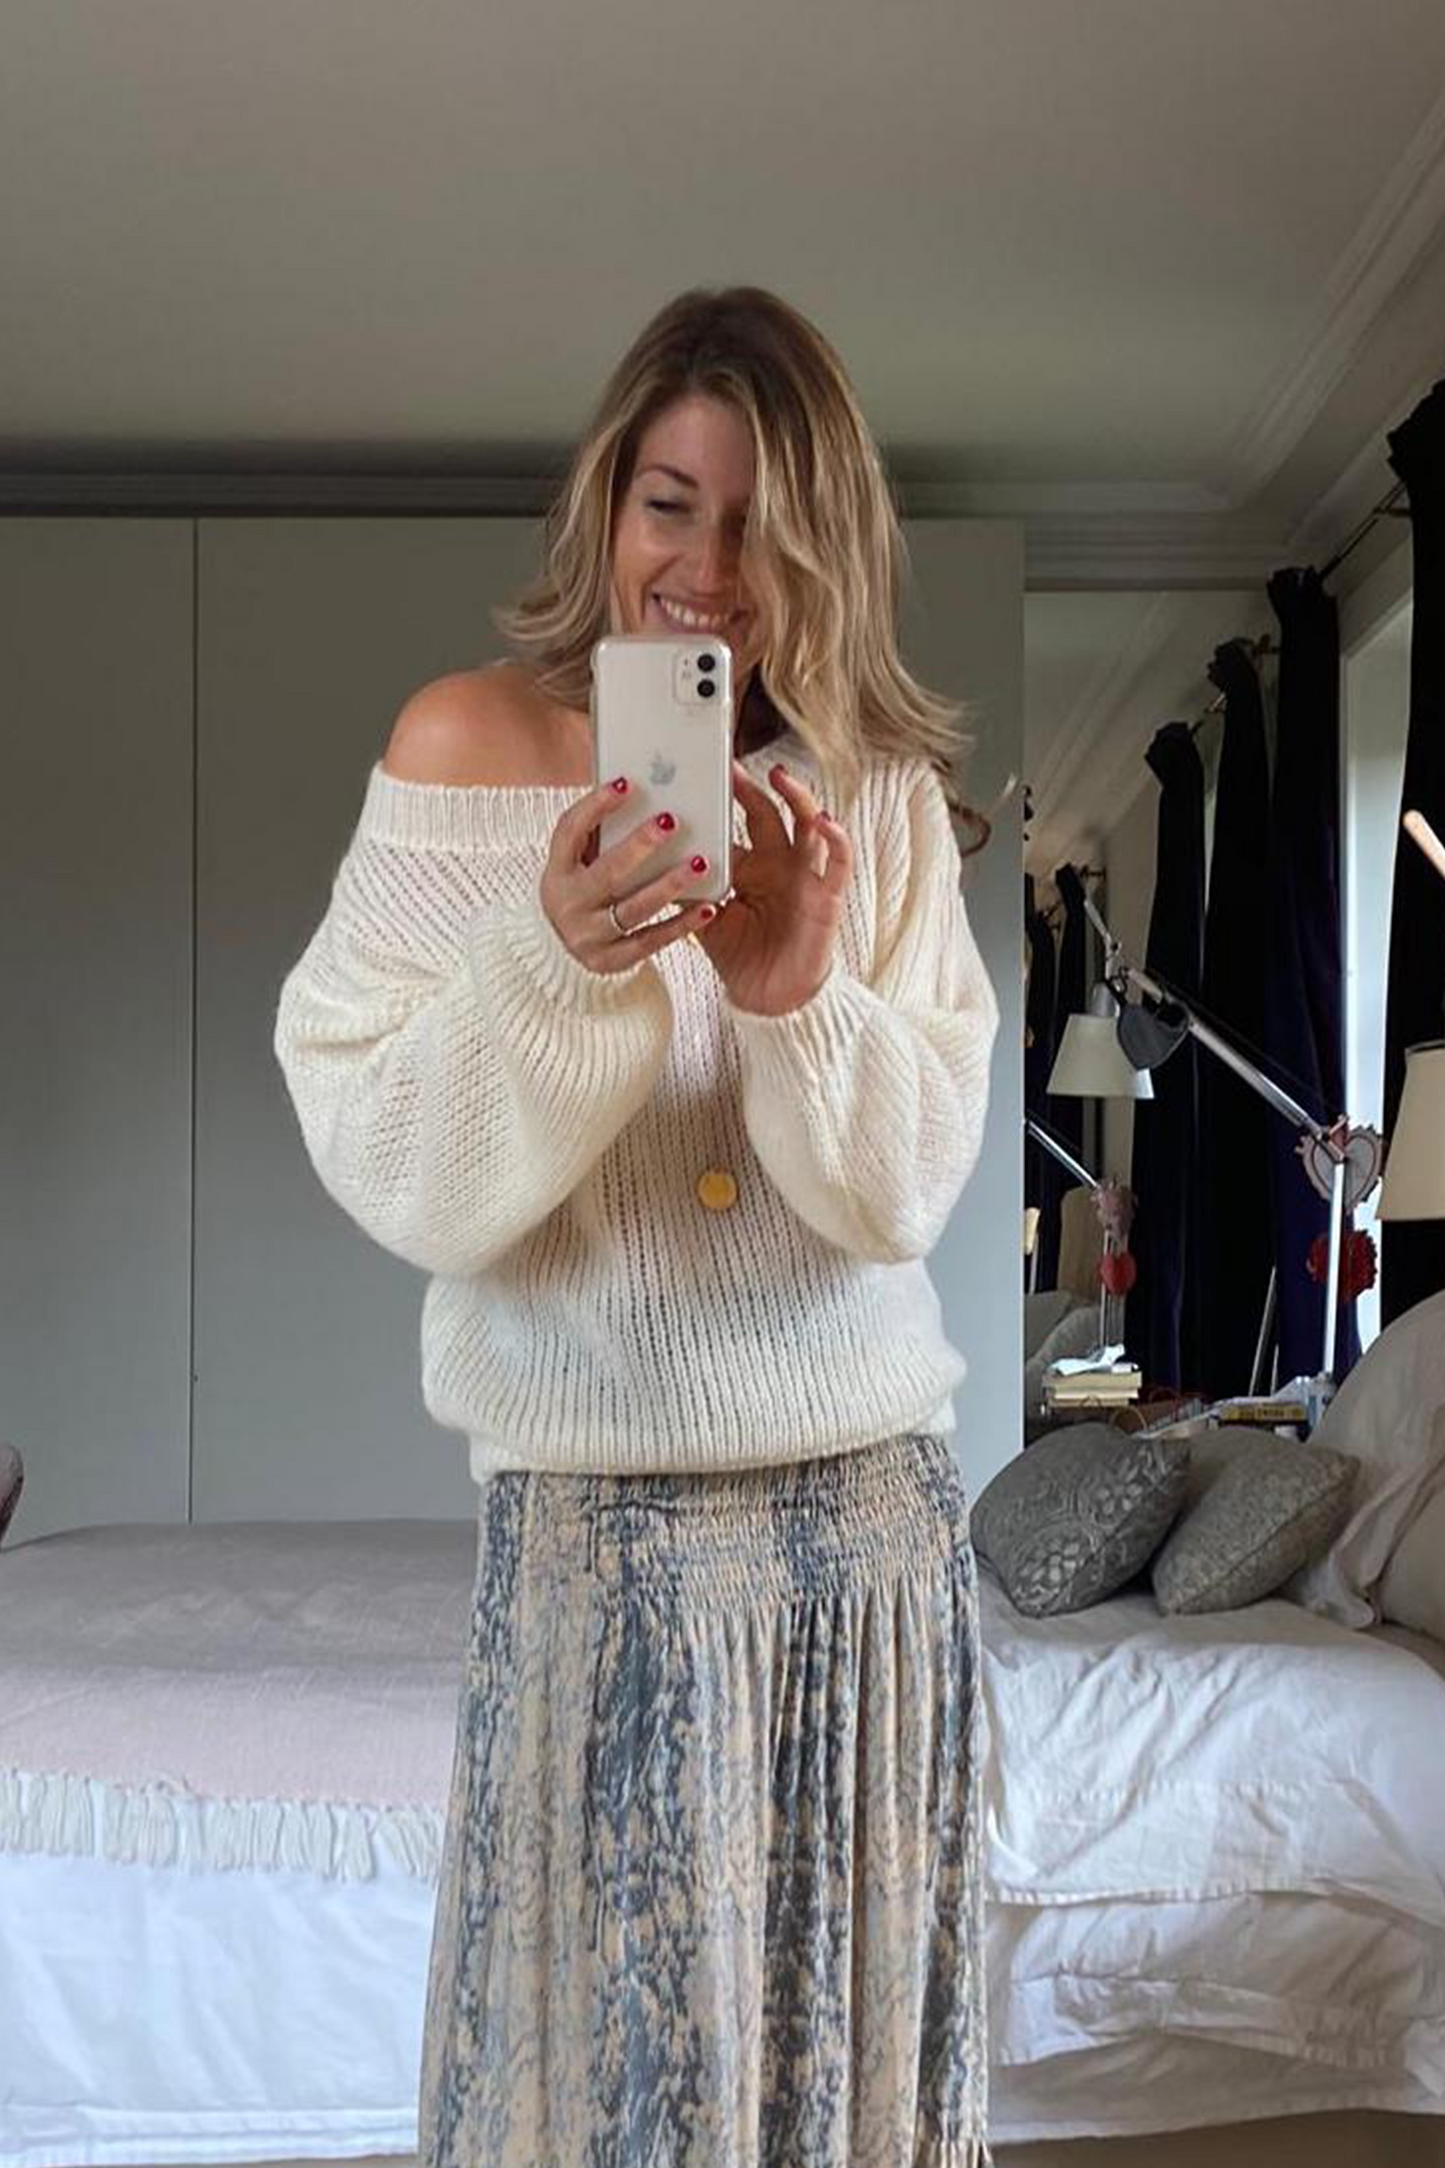 Cropped Mohair Jumper